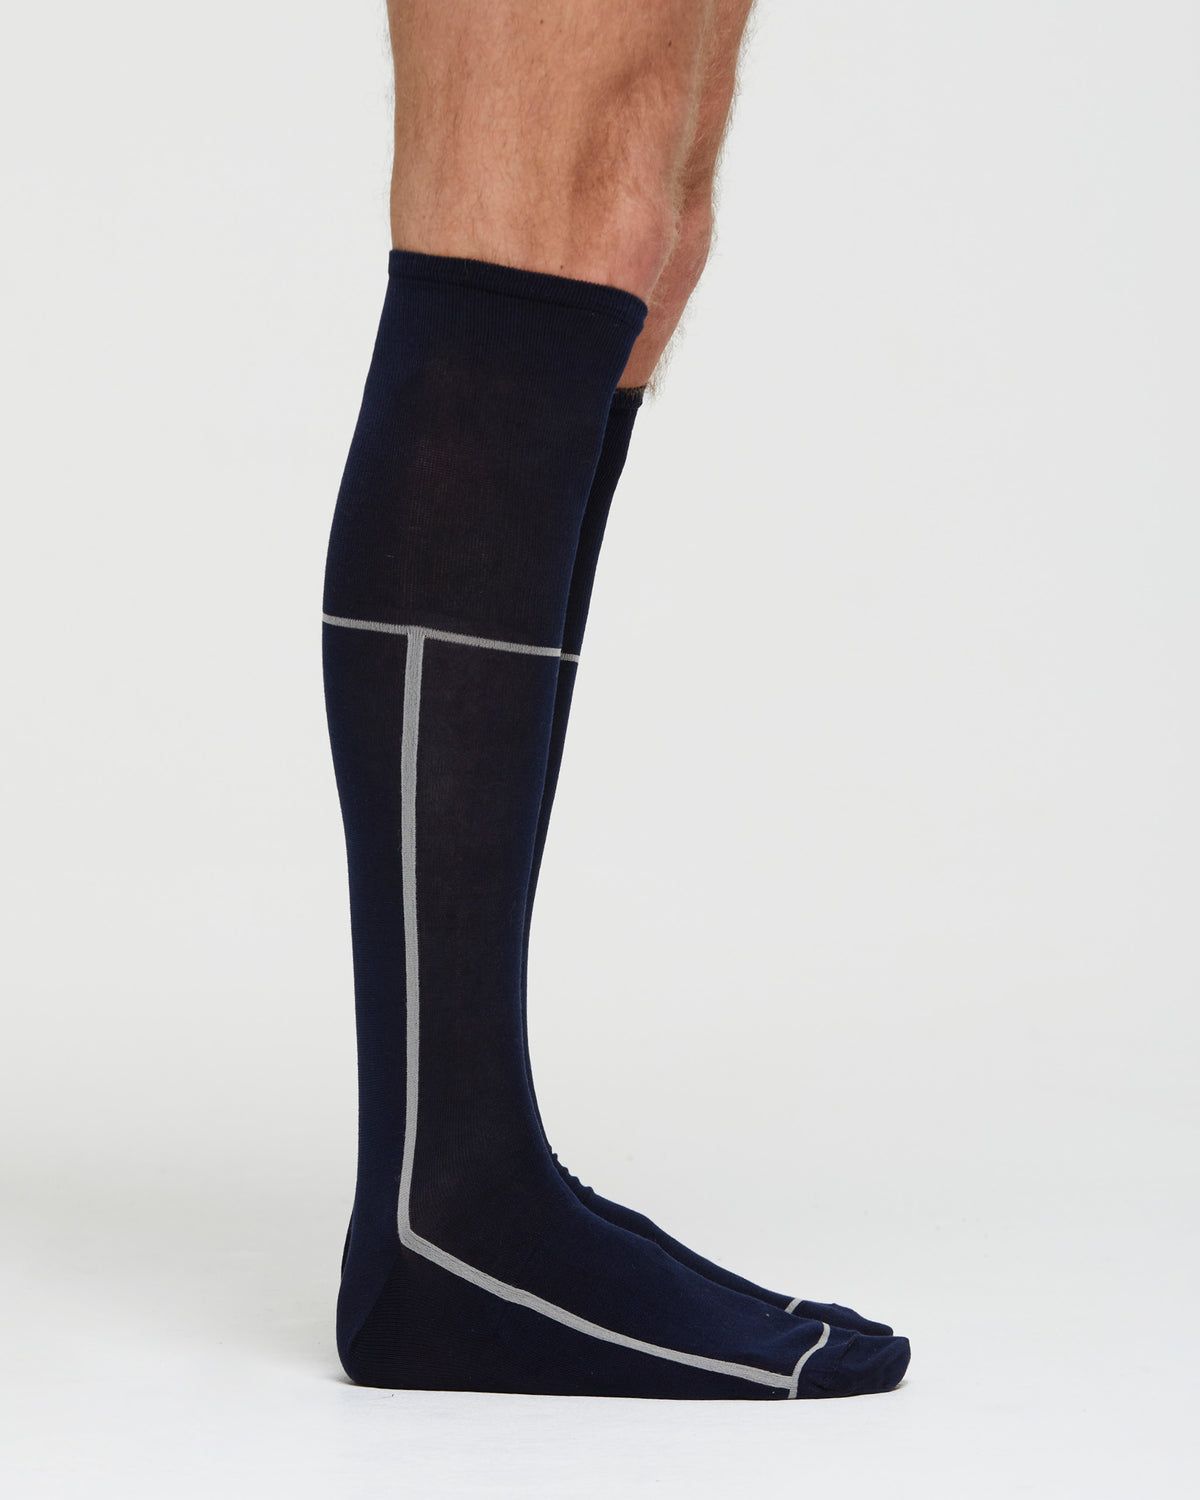 FILIPPO COTTON LONG SOCKS WITH CONTRASTING STRIPE PATTERN